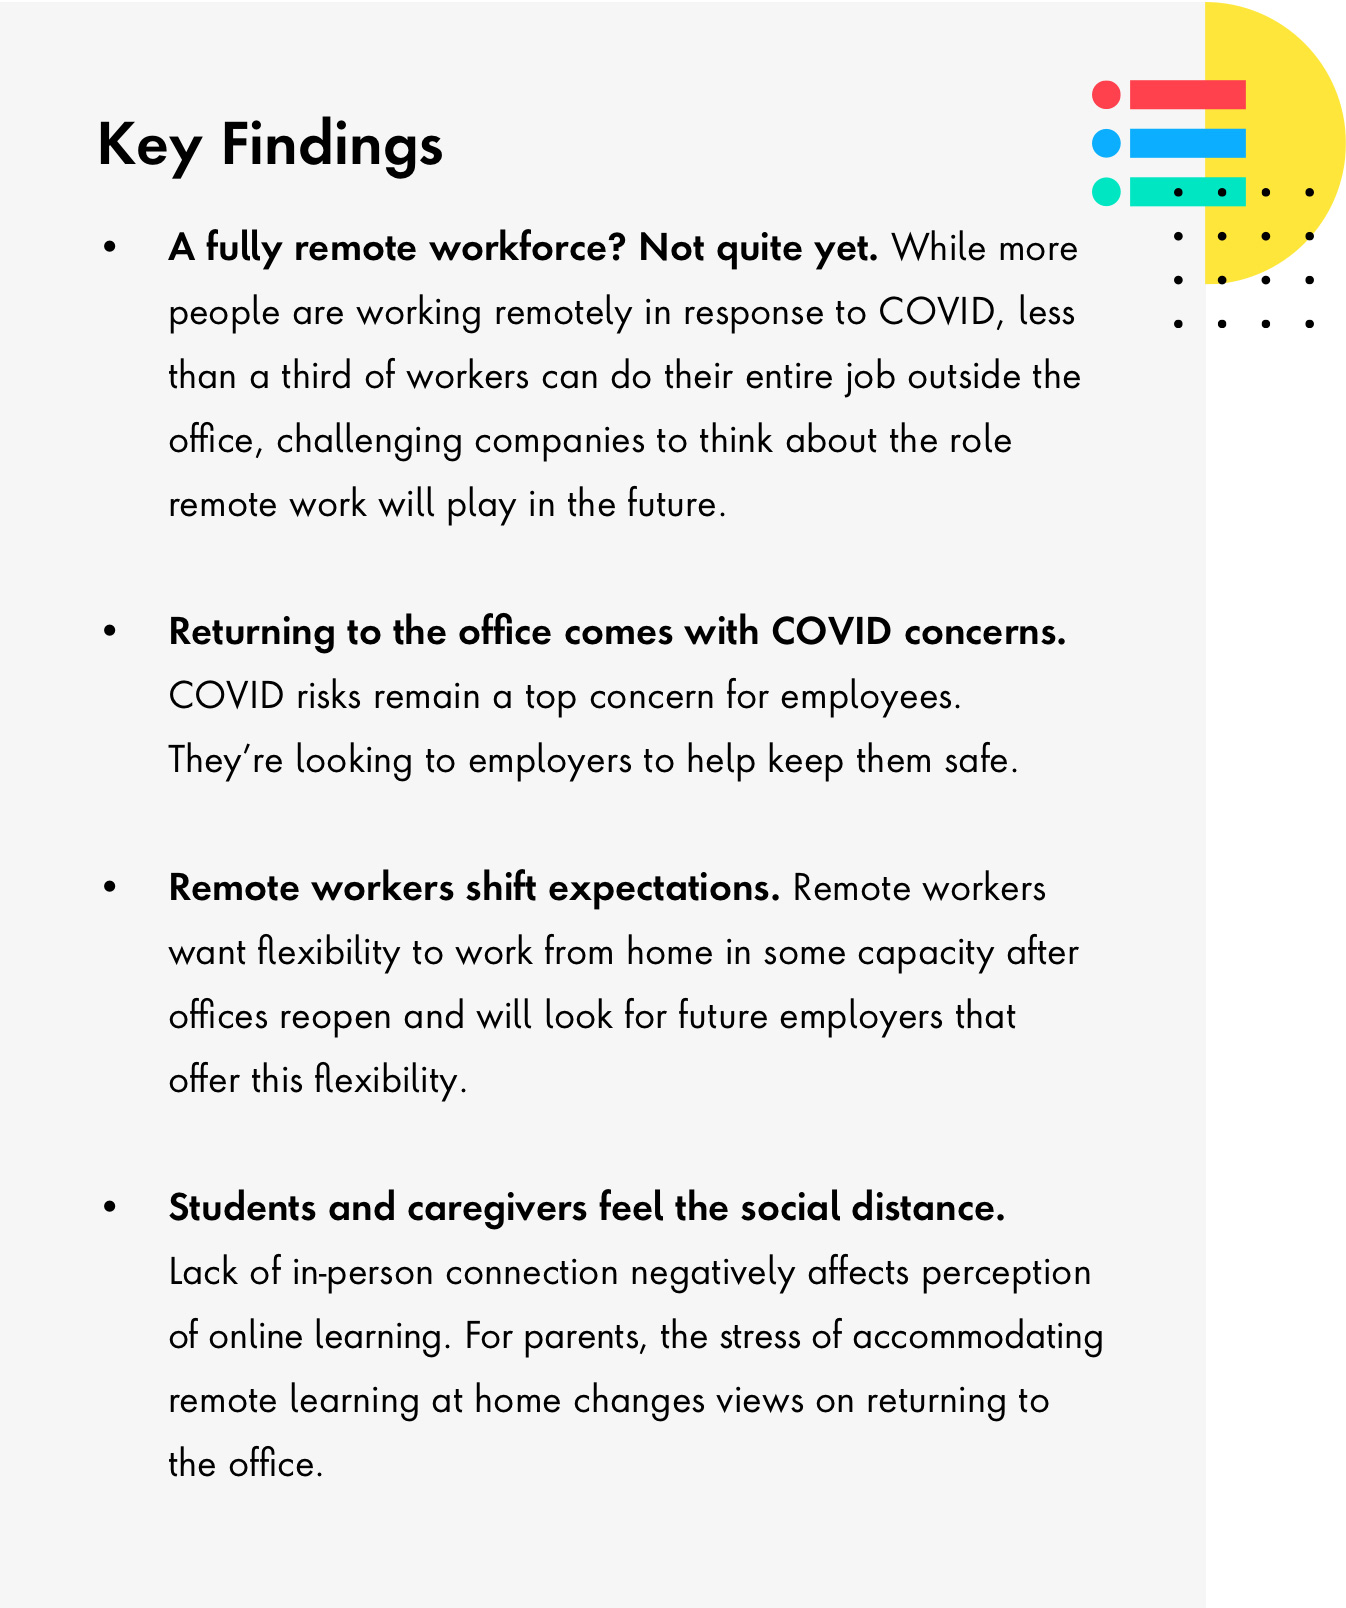 Key findings: A fully remote workforce? Not quite yet. Returning to the office somes with COVID concerns, and what workers expect of their employers to keep them safe. Remote work shifts worker's expectations. Find out what they look for in new opportunities. Lastly, lack of in-person connection negatively affects perception of online learning. How students and caregivers feel the social distance.